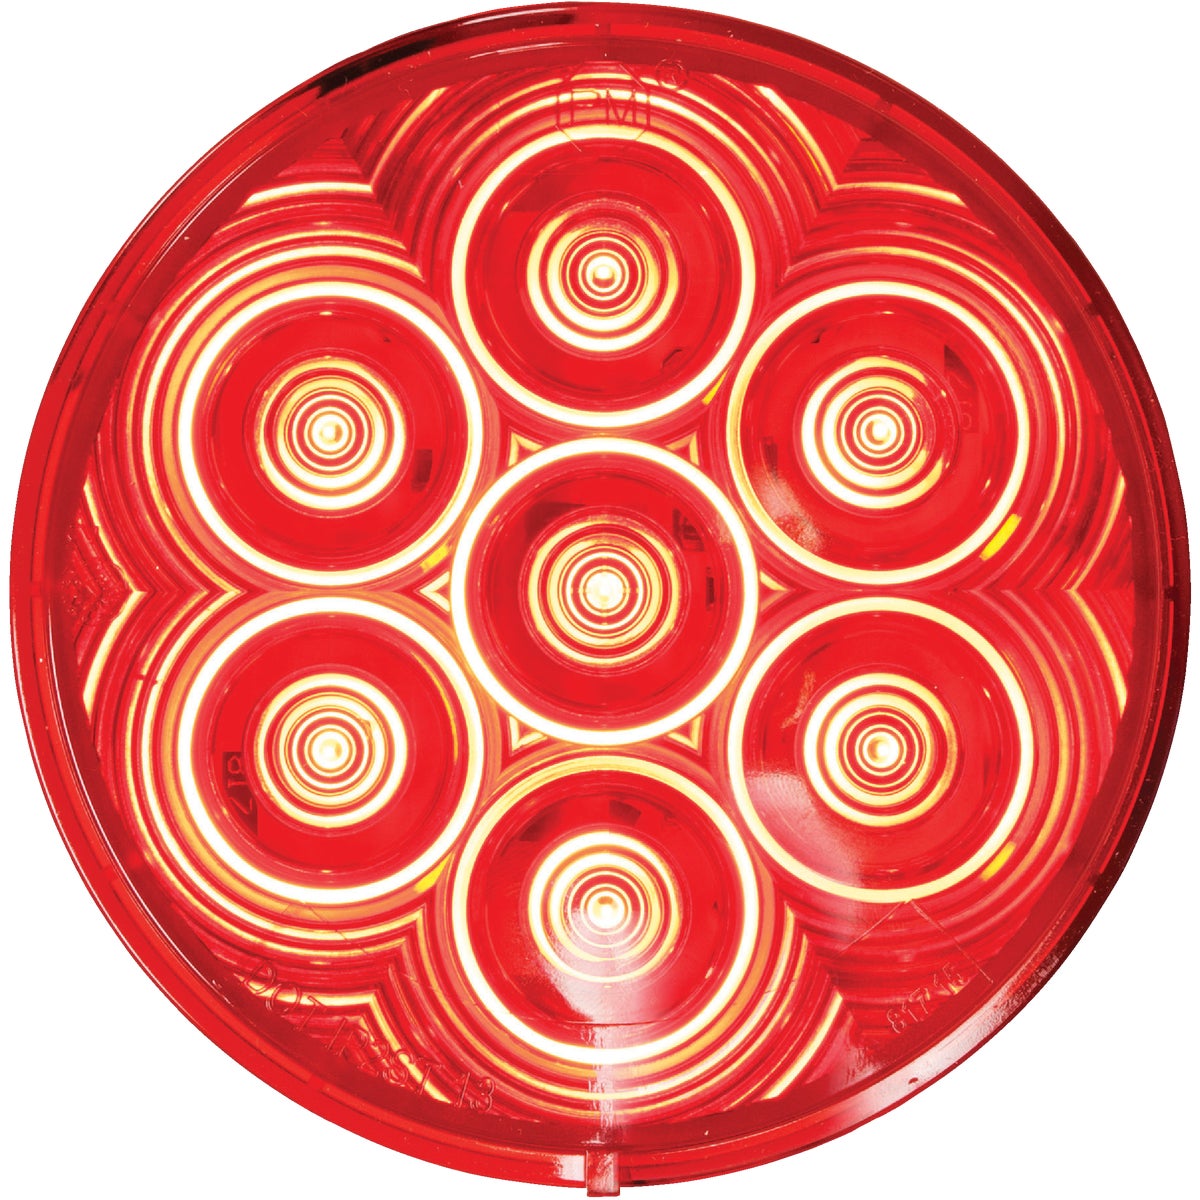 Item 573926, 7-diodes, round LED (light emitting diode) stop, turn, and tail lights.